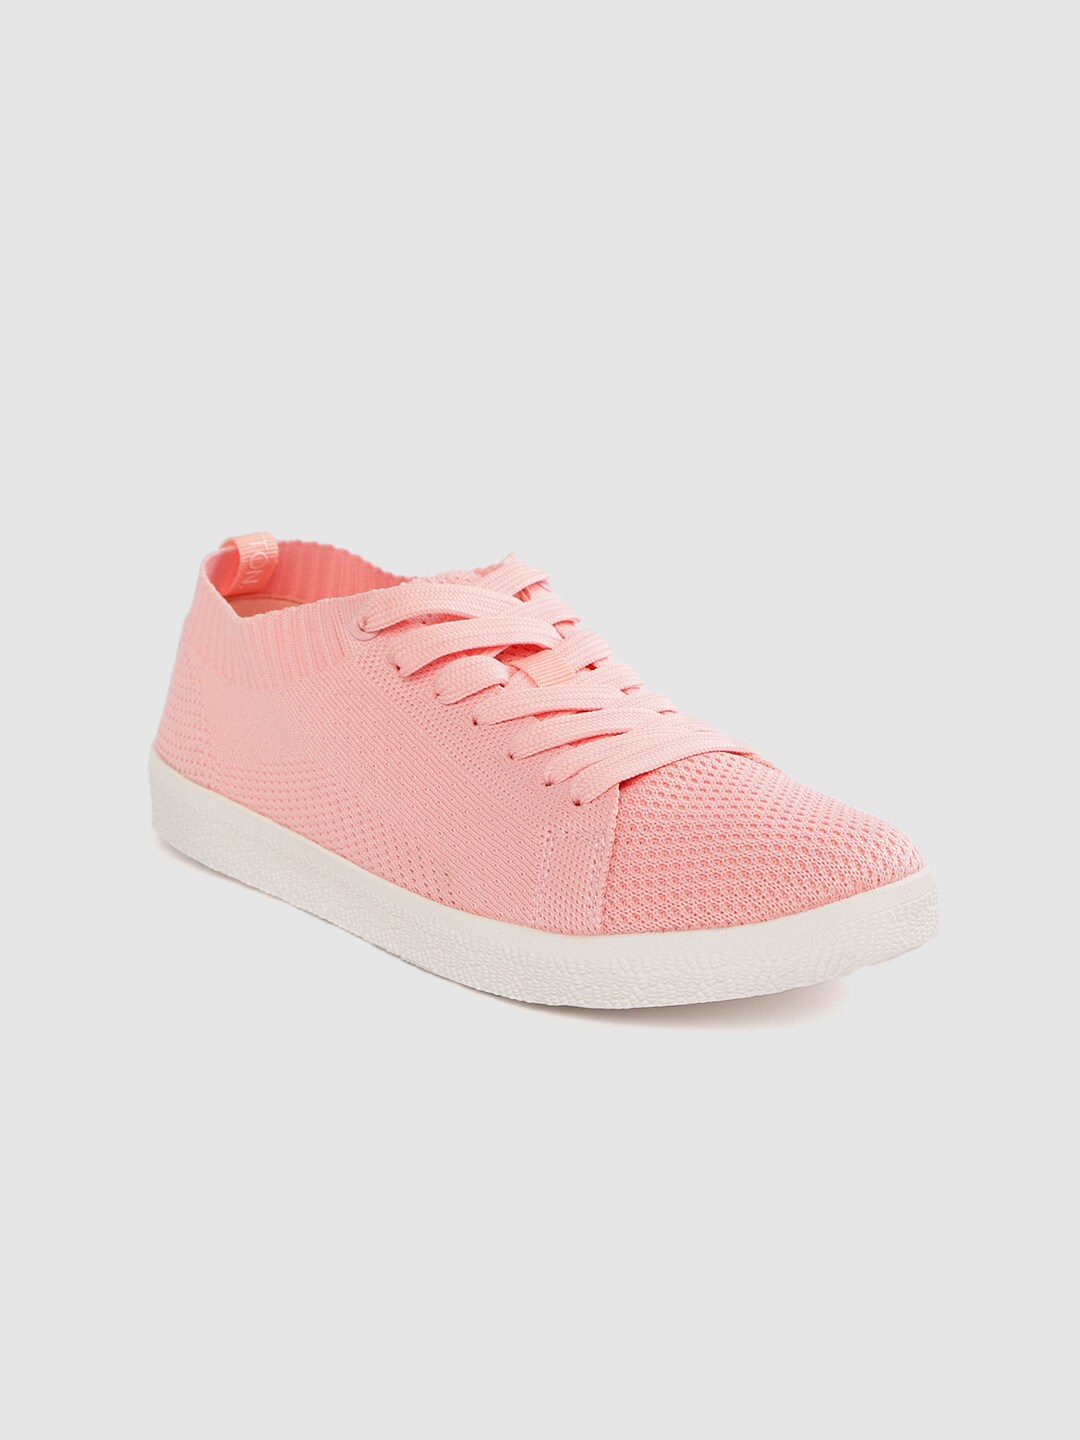 United Colors of Benetton Women Pink Woven Design Sneakers Price in India